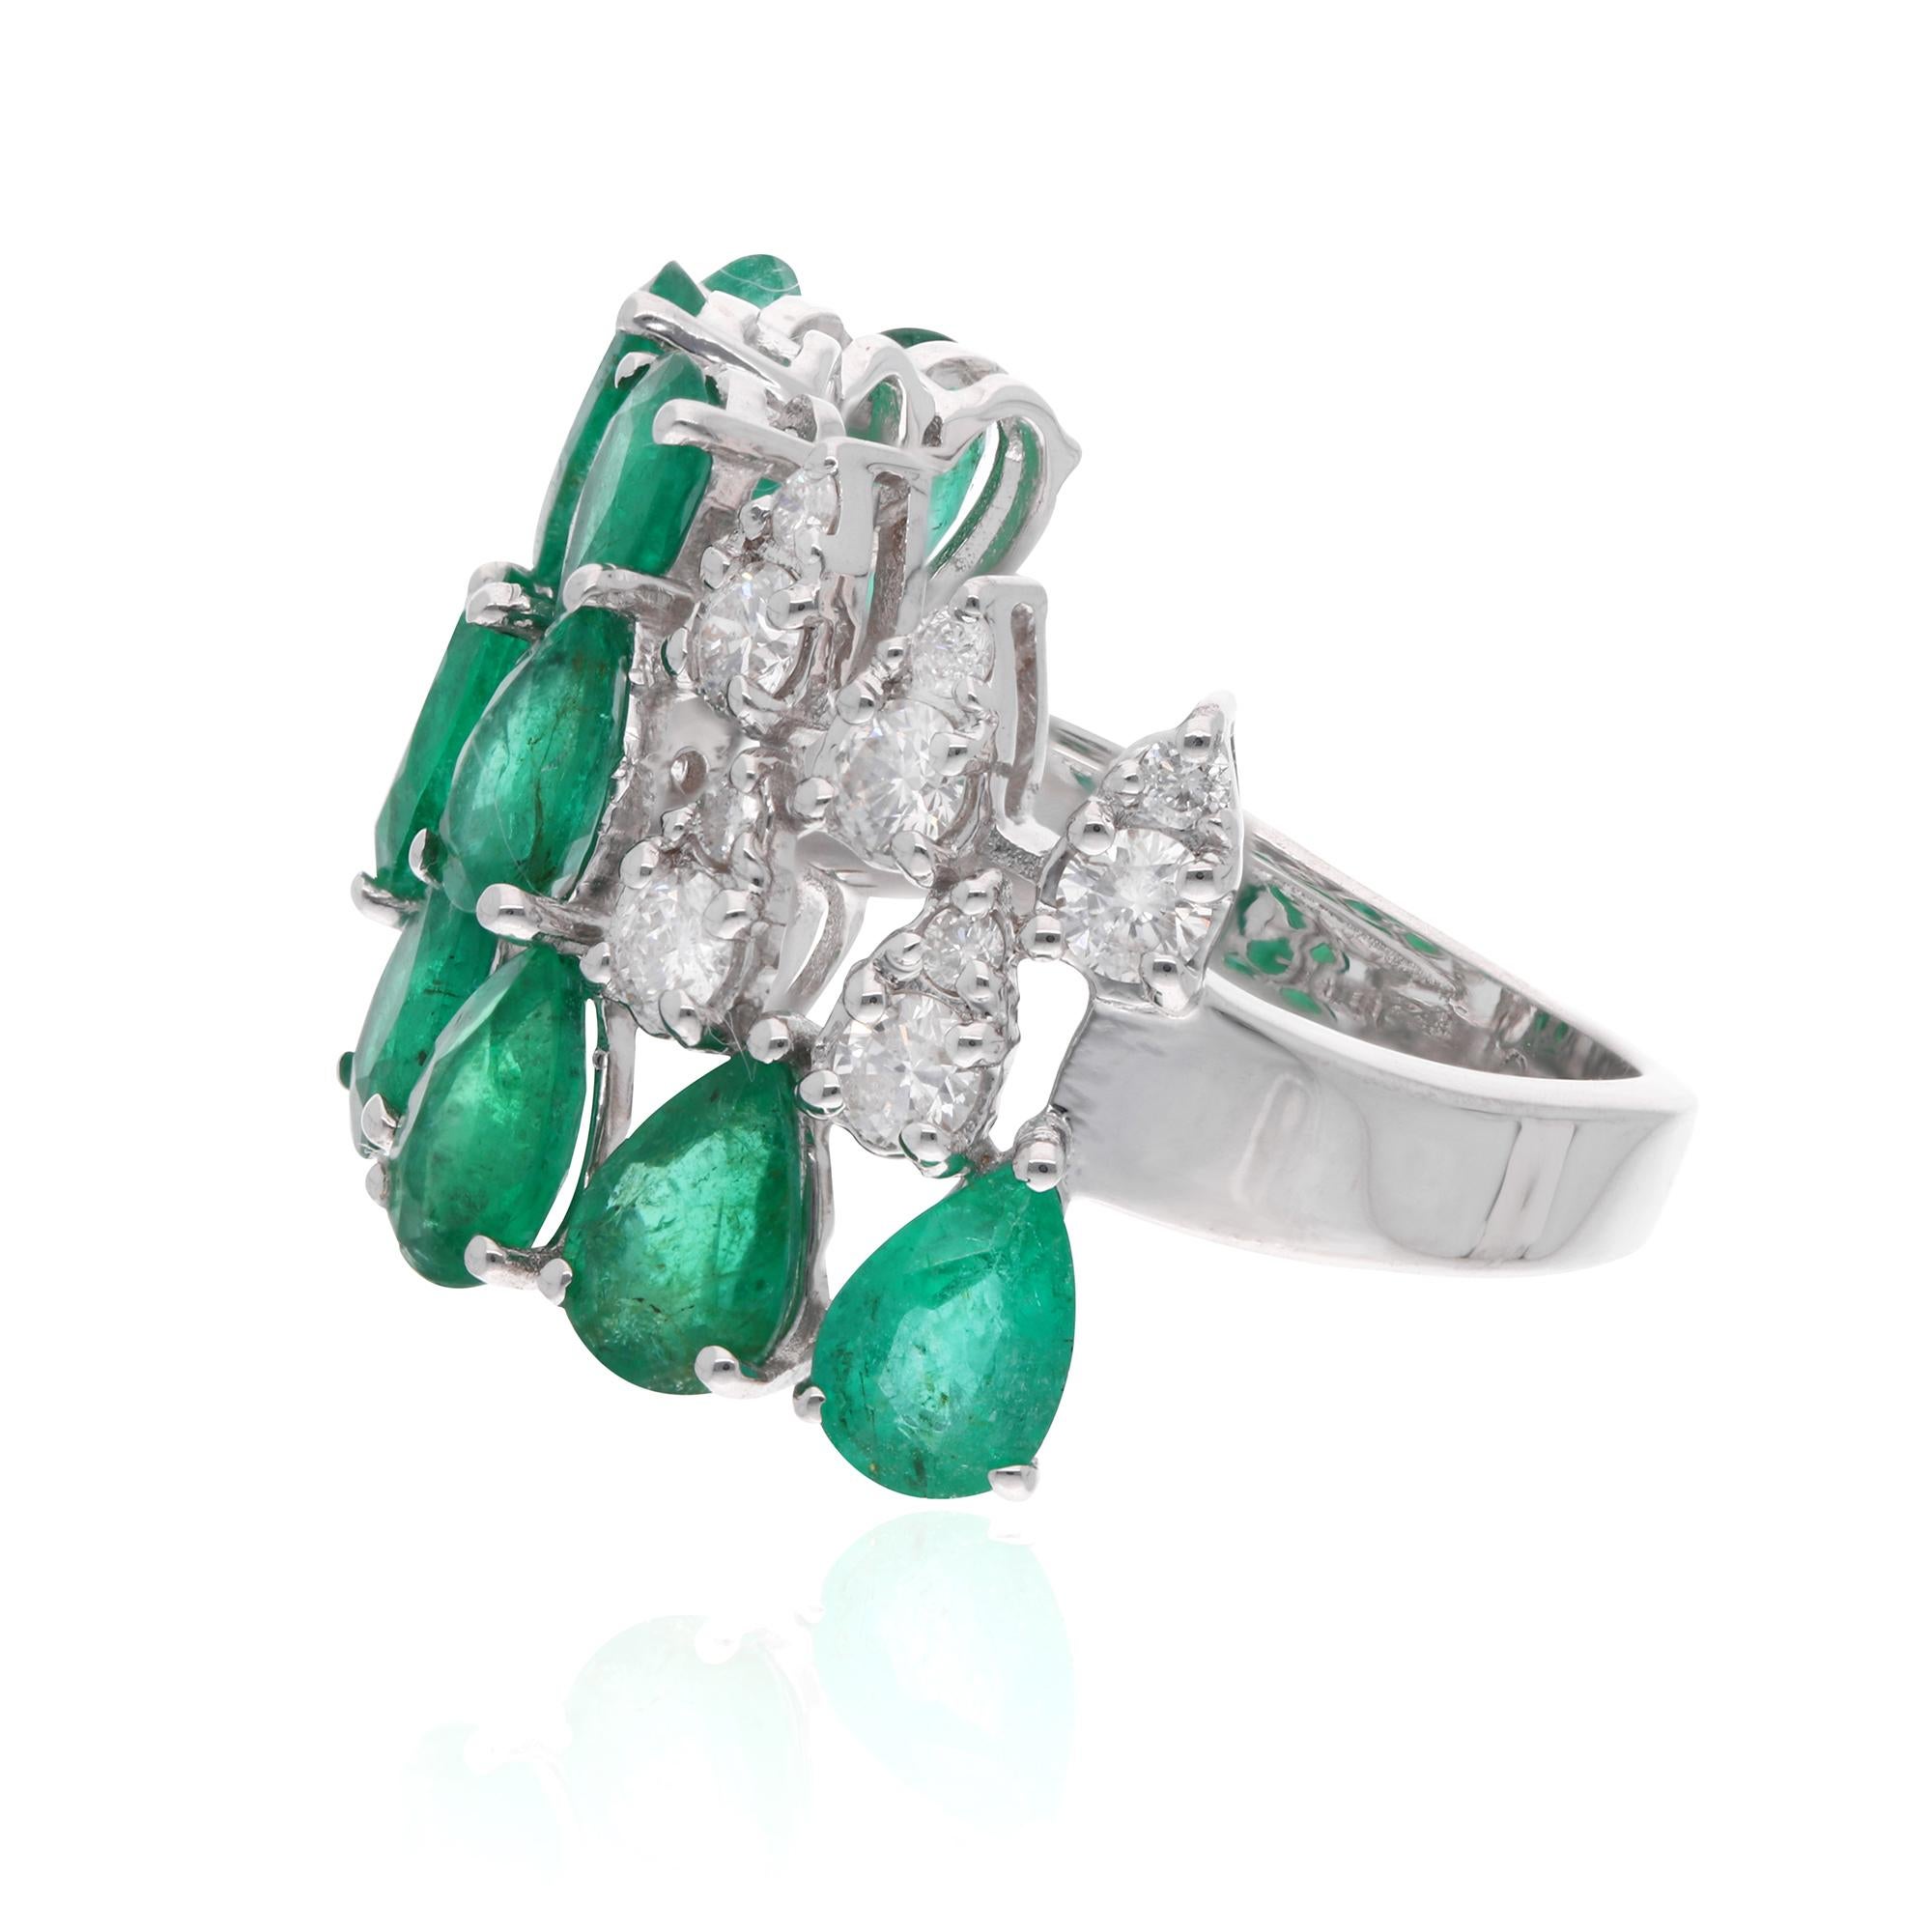 Surrounding the emerald are shimmering diamonds, meticulously set to enhance its natural brilliance and allure. The intricate arrangement of these exquisite diamonds adds an extra dimension of luxury and sophistication to the design, catching the